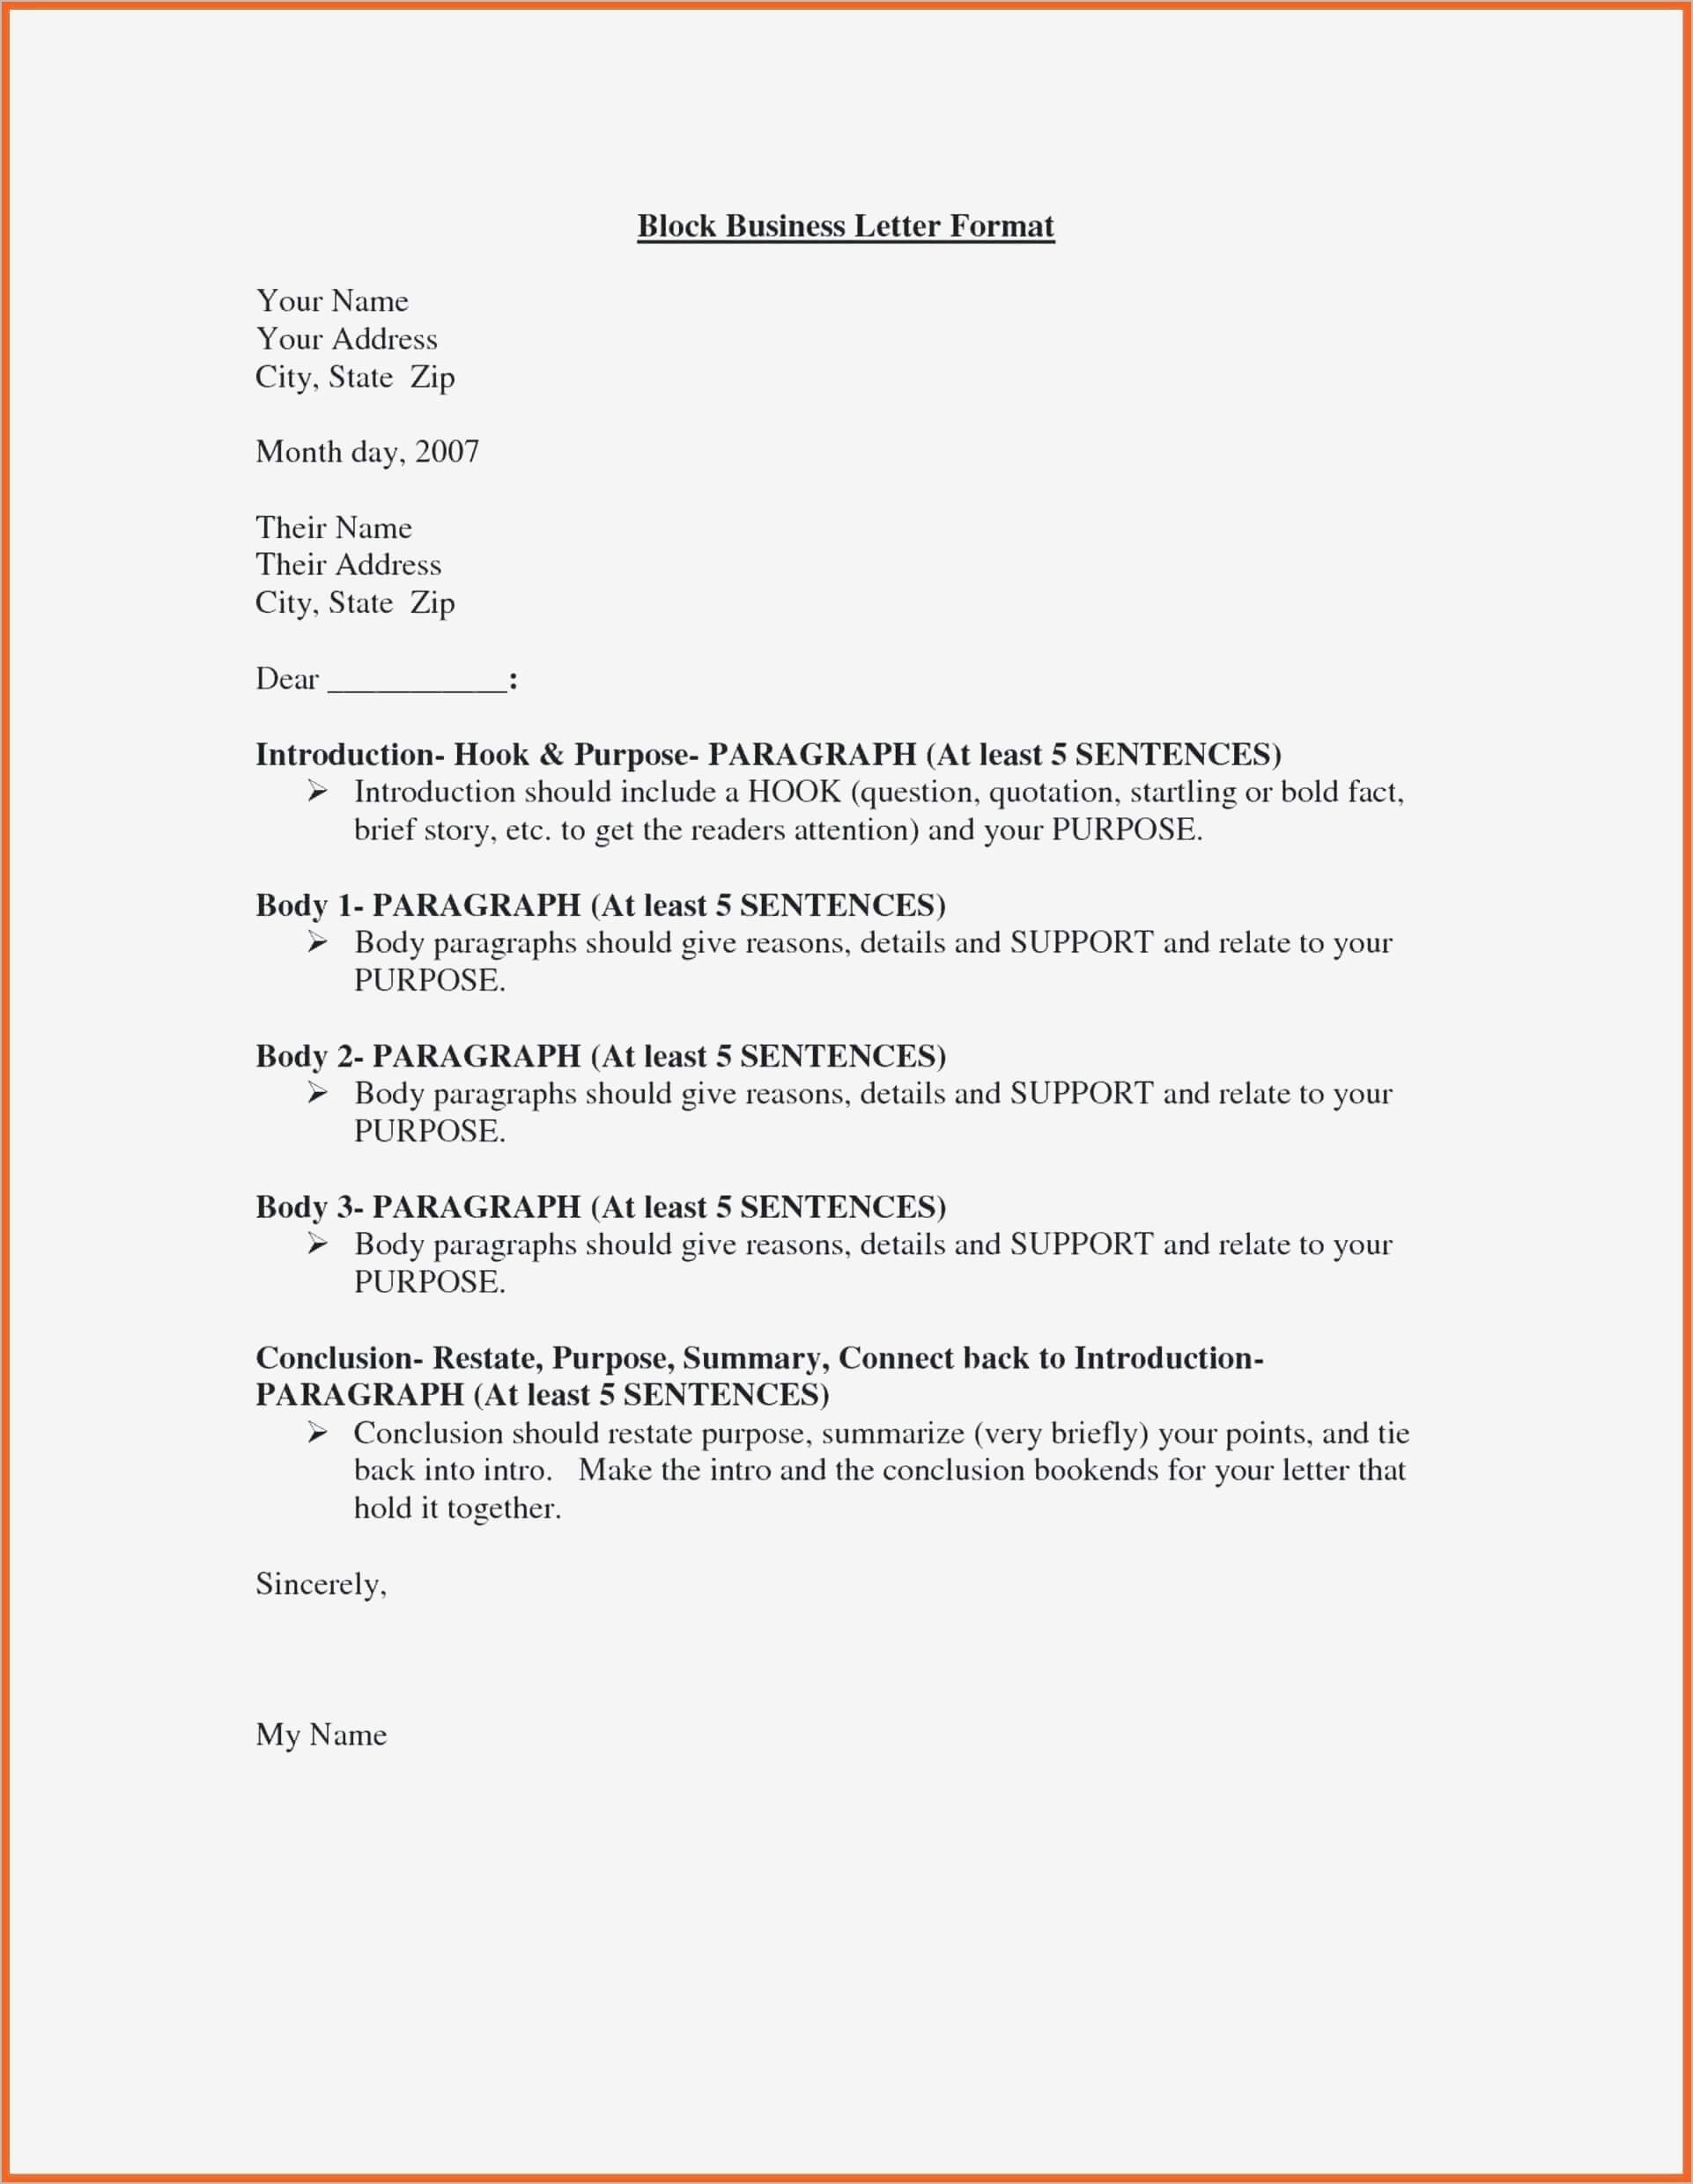 Business Letter Template Microsoft Word 2007 Intended For Microsoft Word Business Letter Template